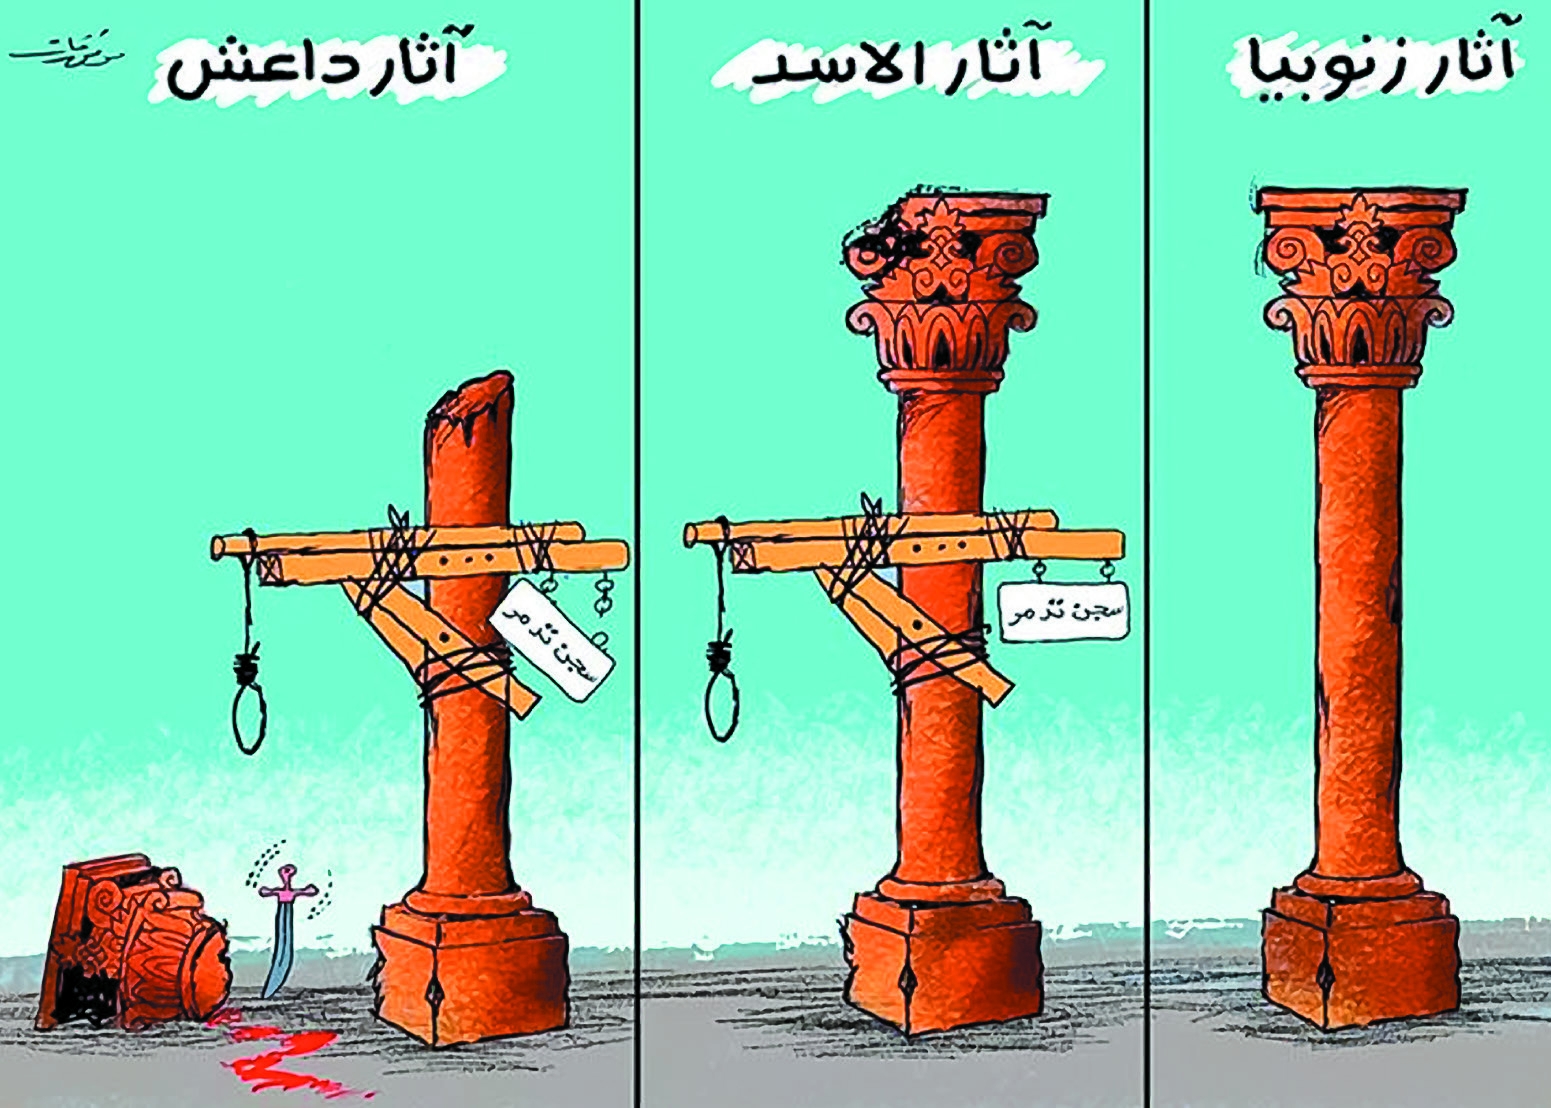 Mwafaq Katt’s cartoon Palmyra from 2015. The first marches in Palmyra took place in April 2011 at the funeral of a soldier, executed for refusing to fire on a protest